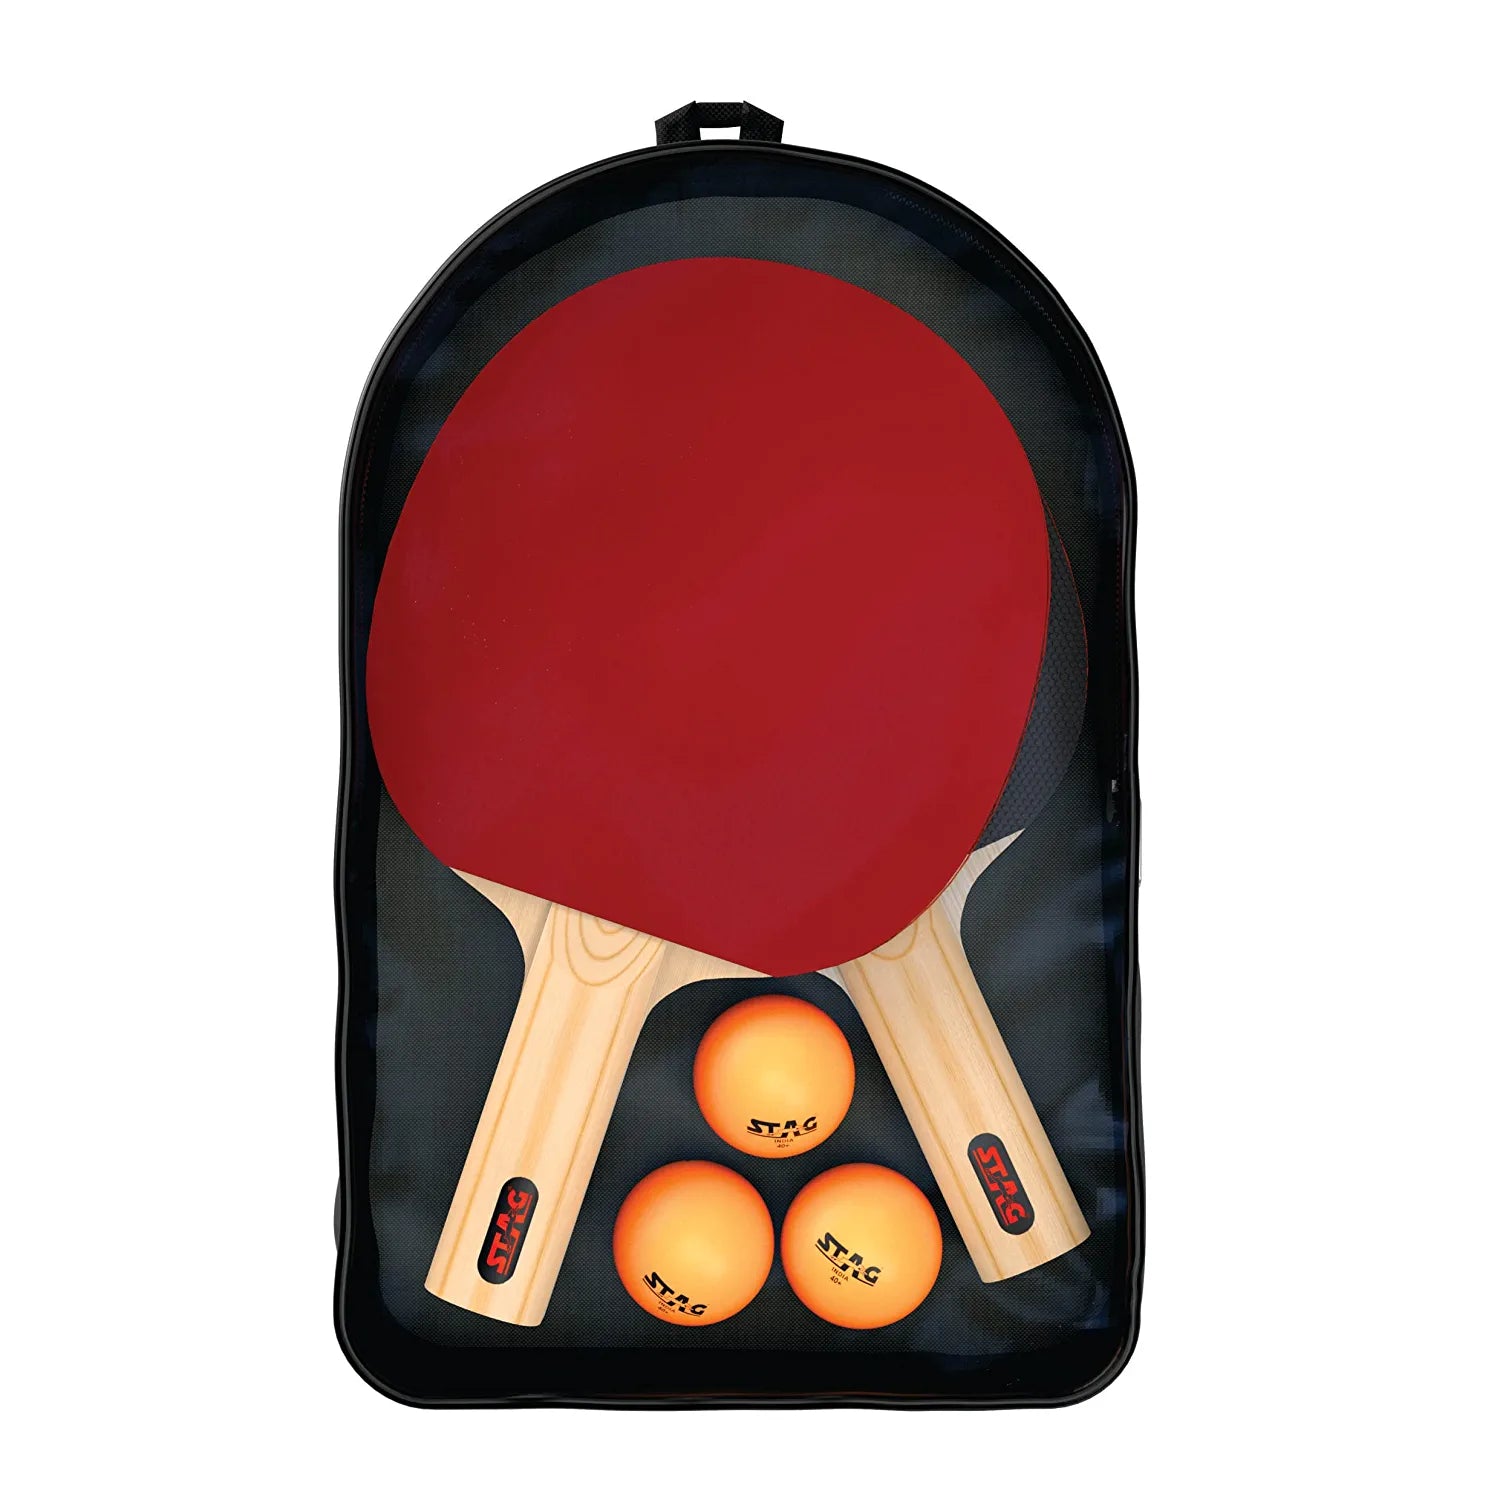 Stag 1 Star Table Tennis Play Set (2 Bats and 3 Balls)